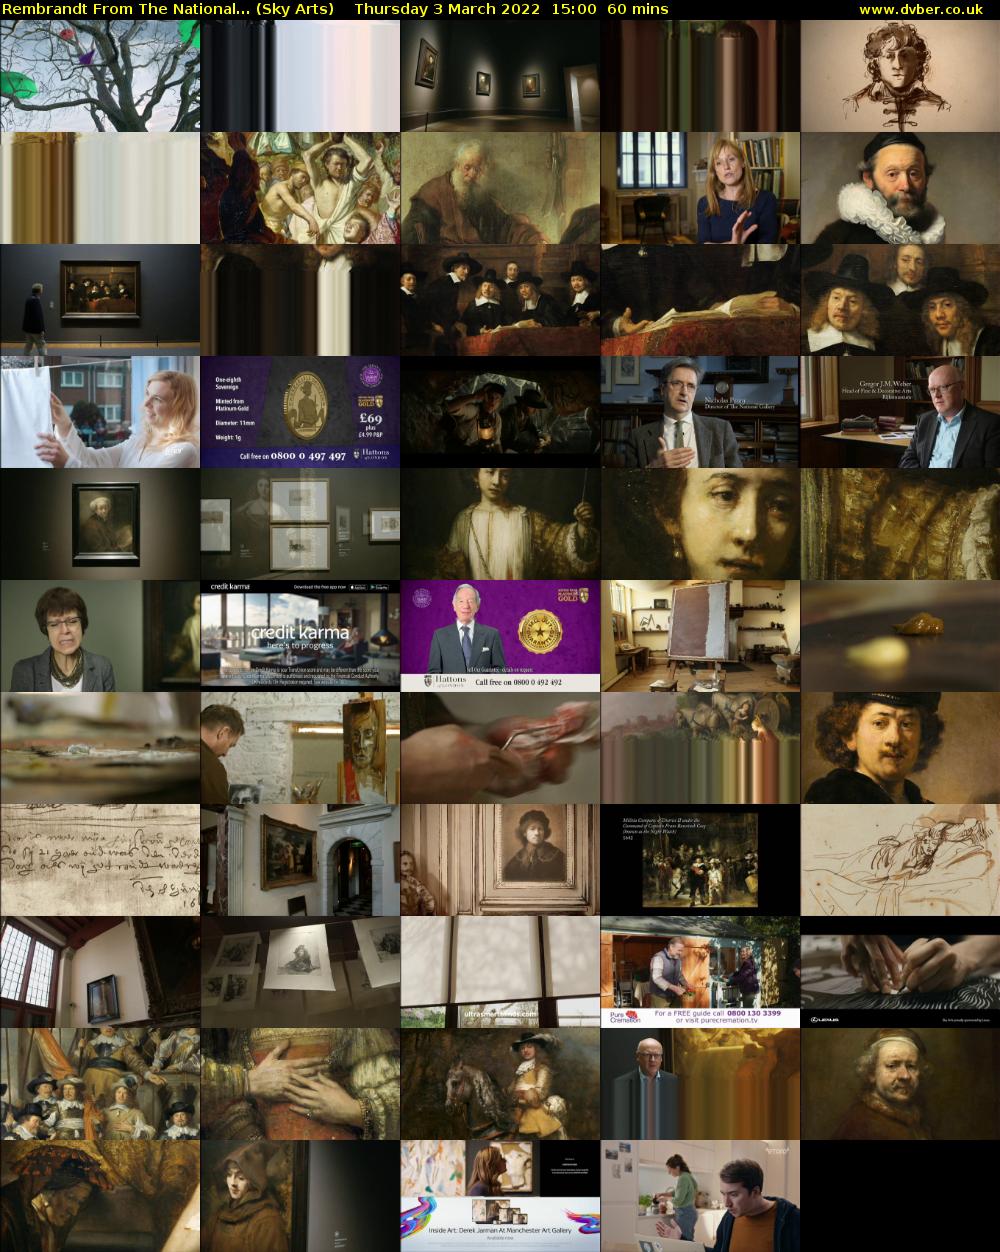 Rembrandt From The National... (Sky Arts) Thursday 3 March 2022 15:00 - 16:00